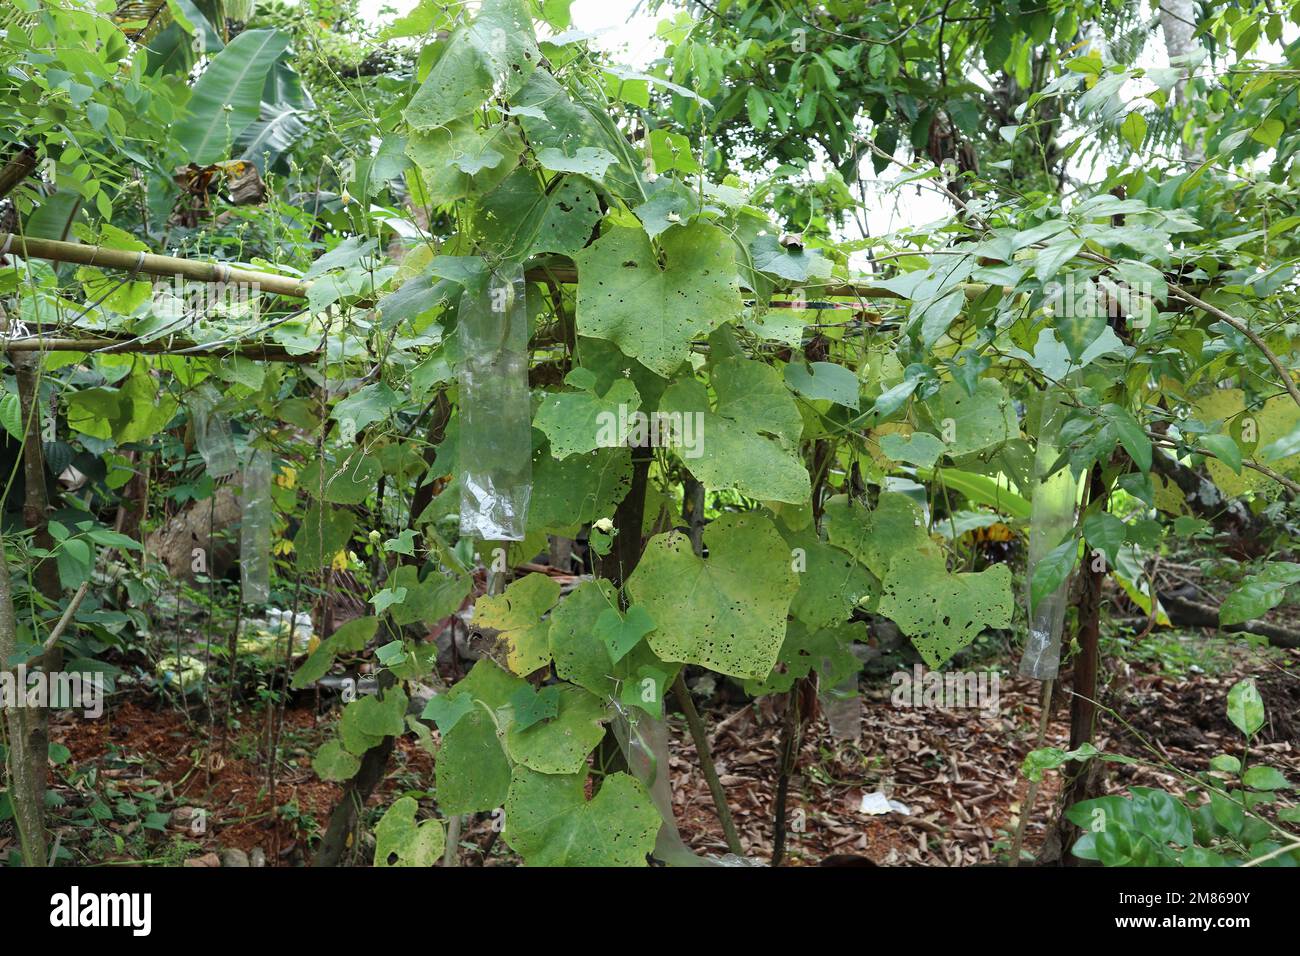 A Ridged Gourd vine (Luffa Acutangula) growing on support structure with leaves and fruits in the home garden. The vine has a polythene cover attached Stock Photo